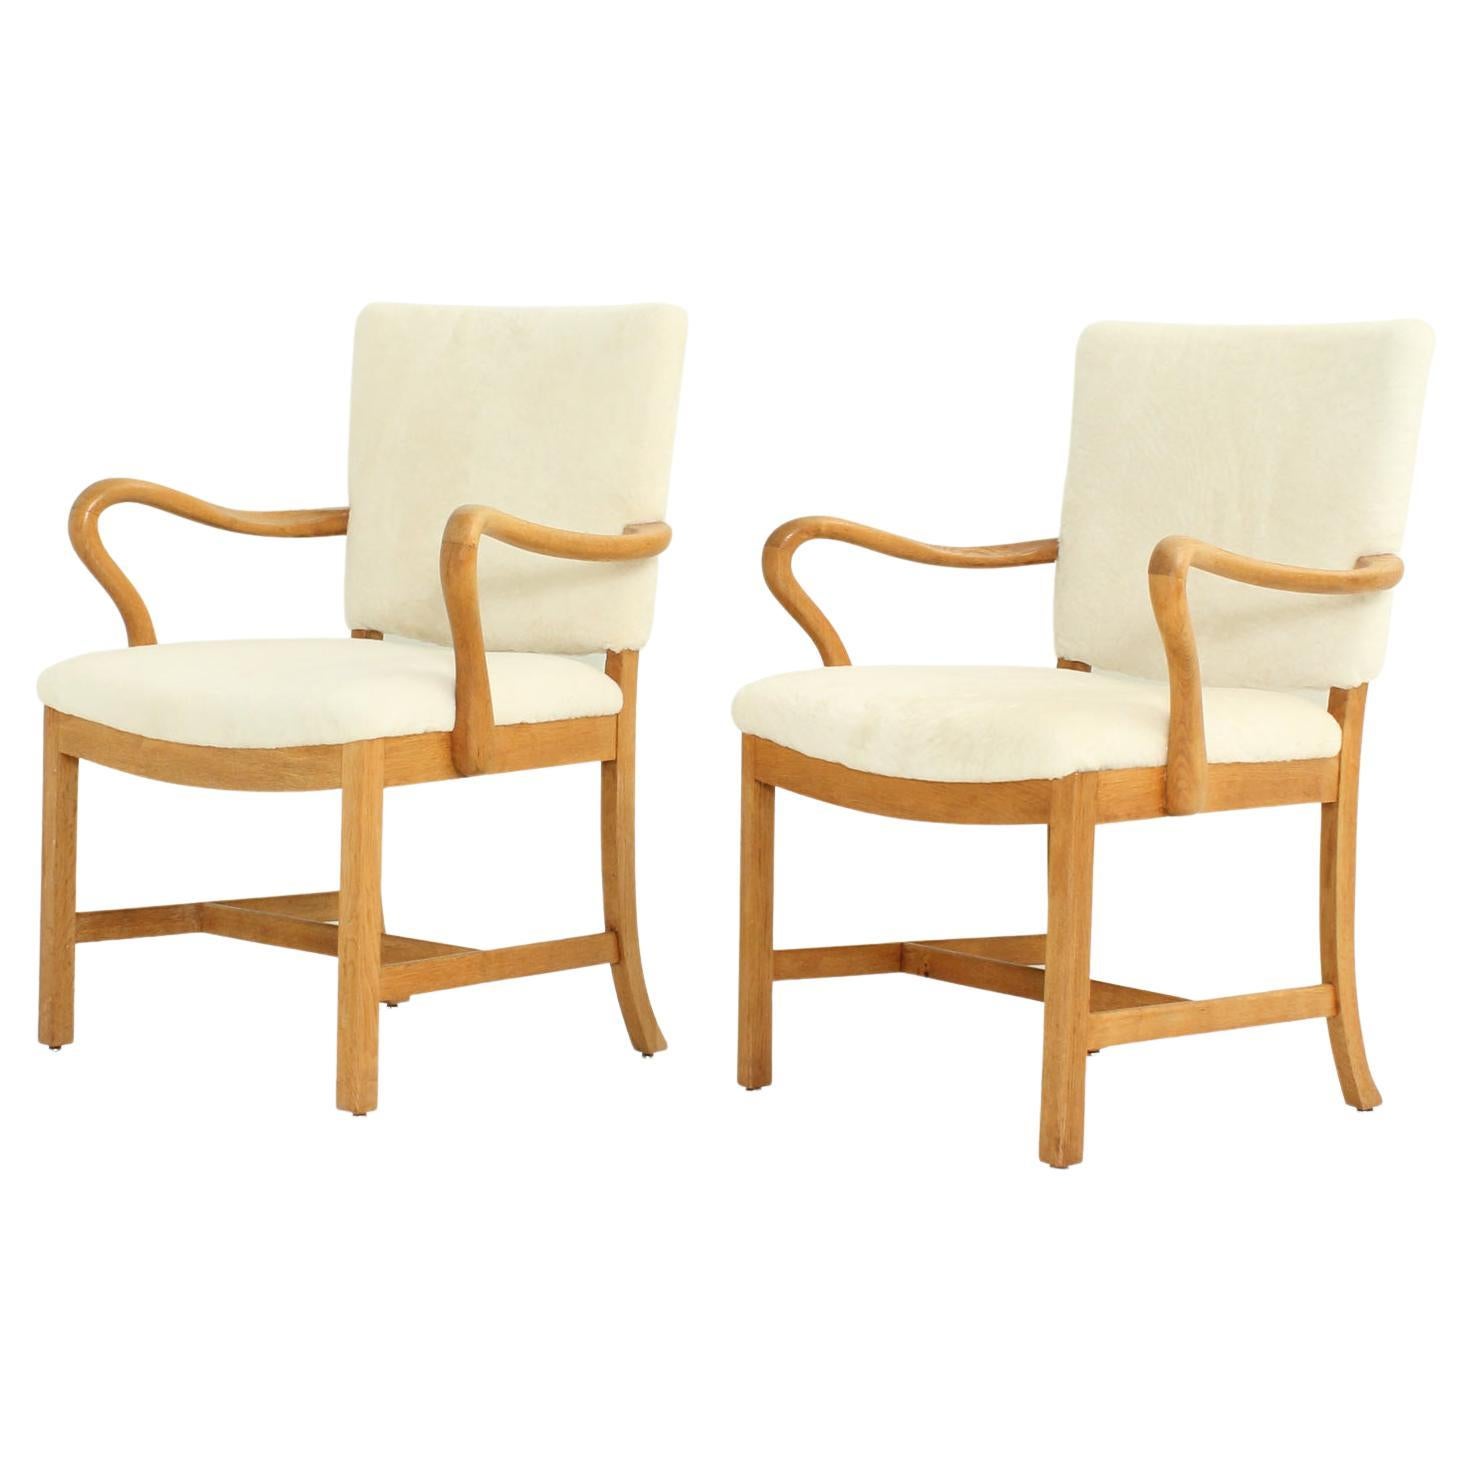 Pair of Armchairs by Jacob Kjaer, Denmark, 1930's